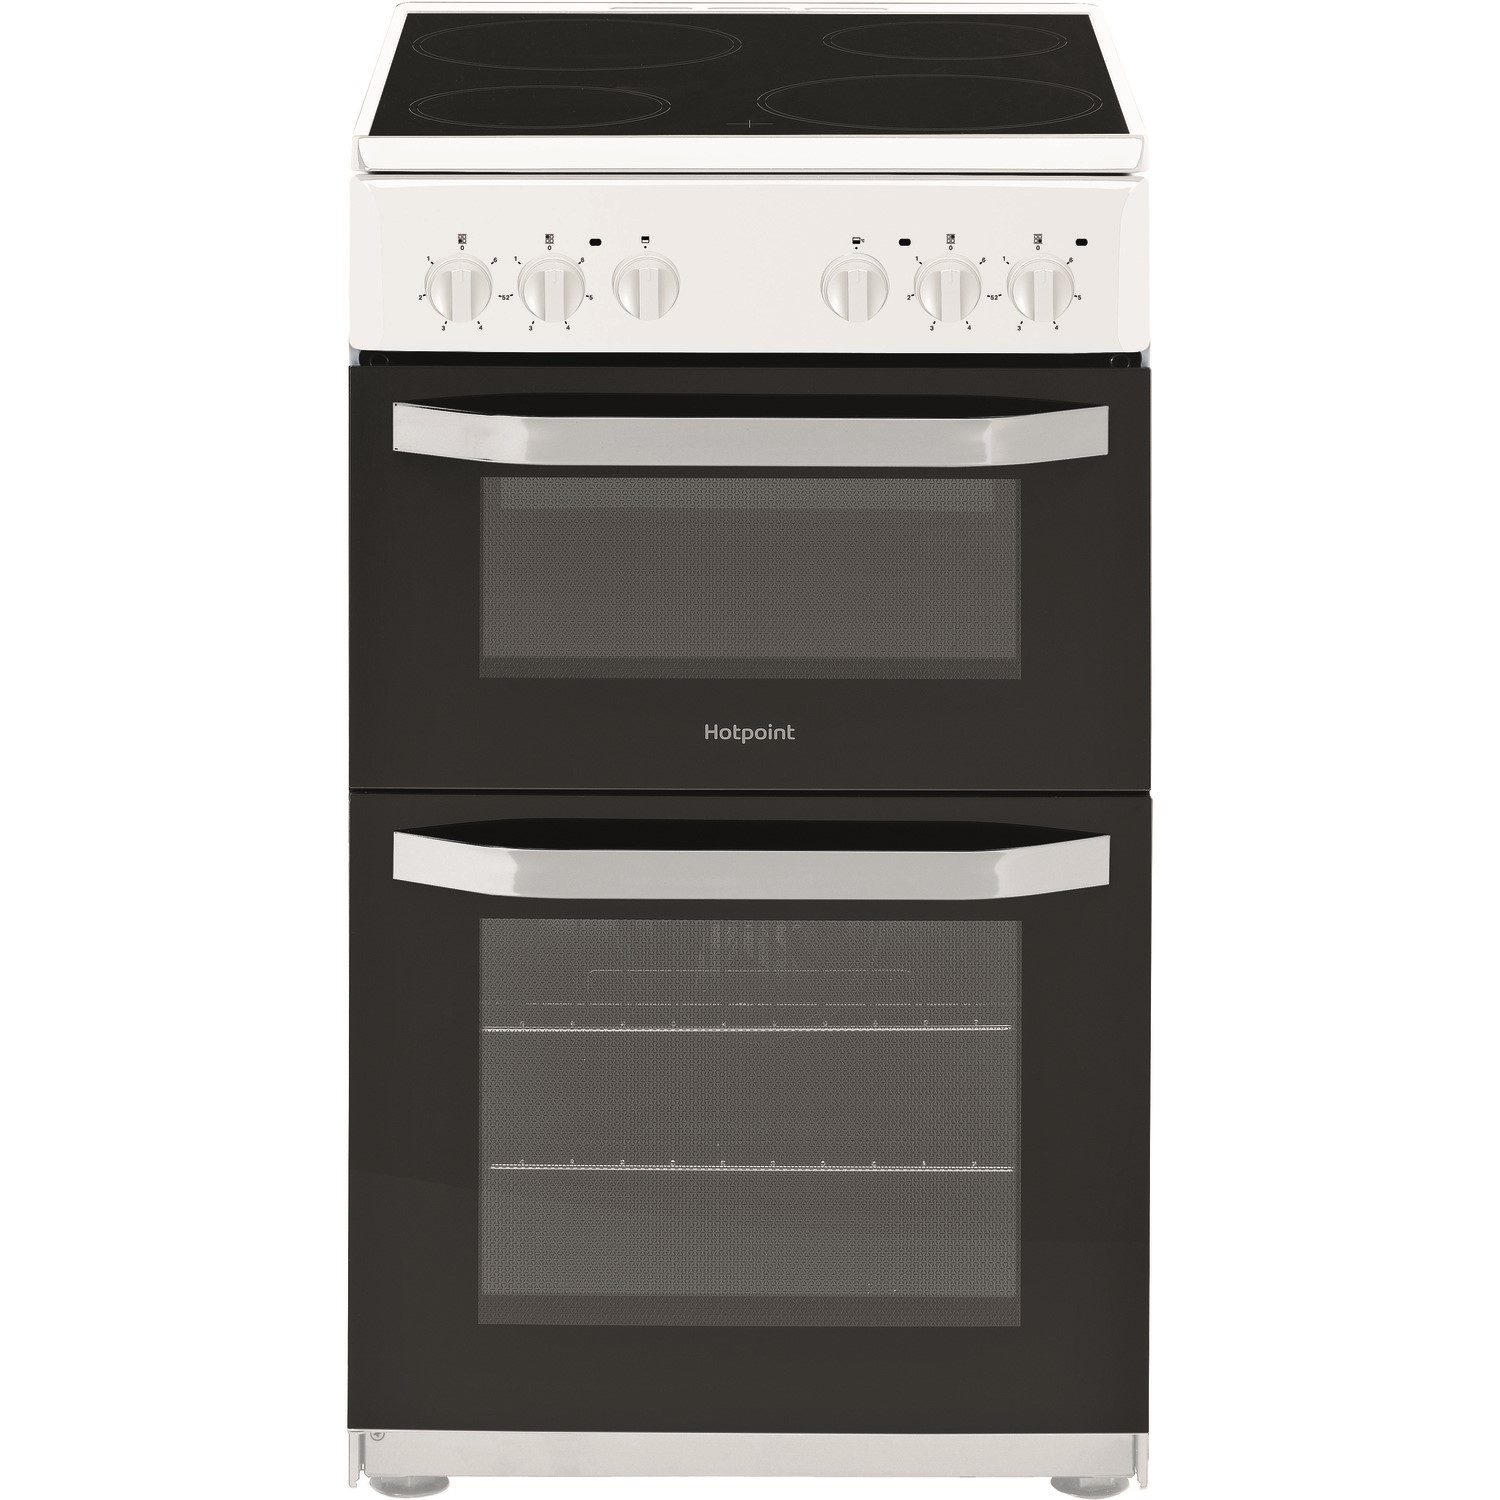 Refurbished Hotpoint HD5V92KCW 50cm Double Cavity Electric Cooker With Ceramic Hob - White